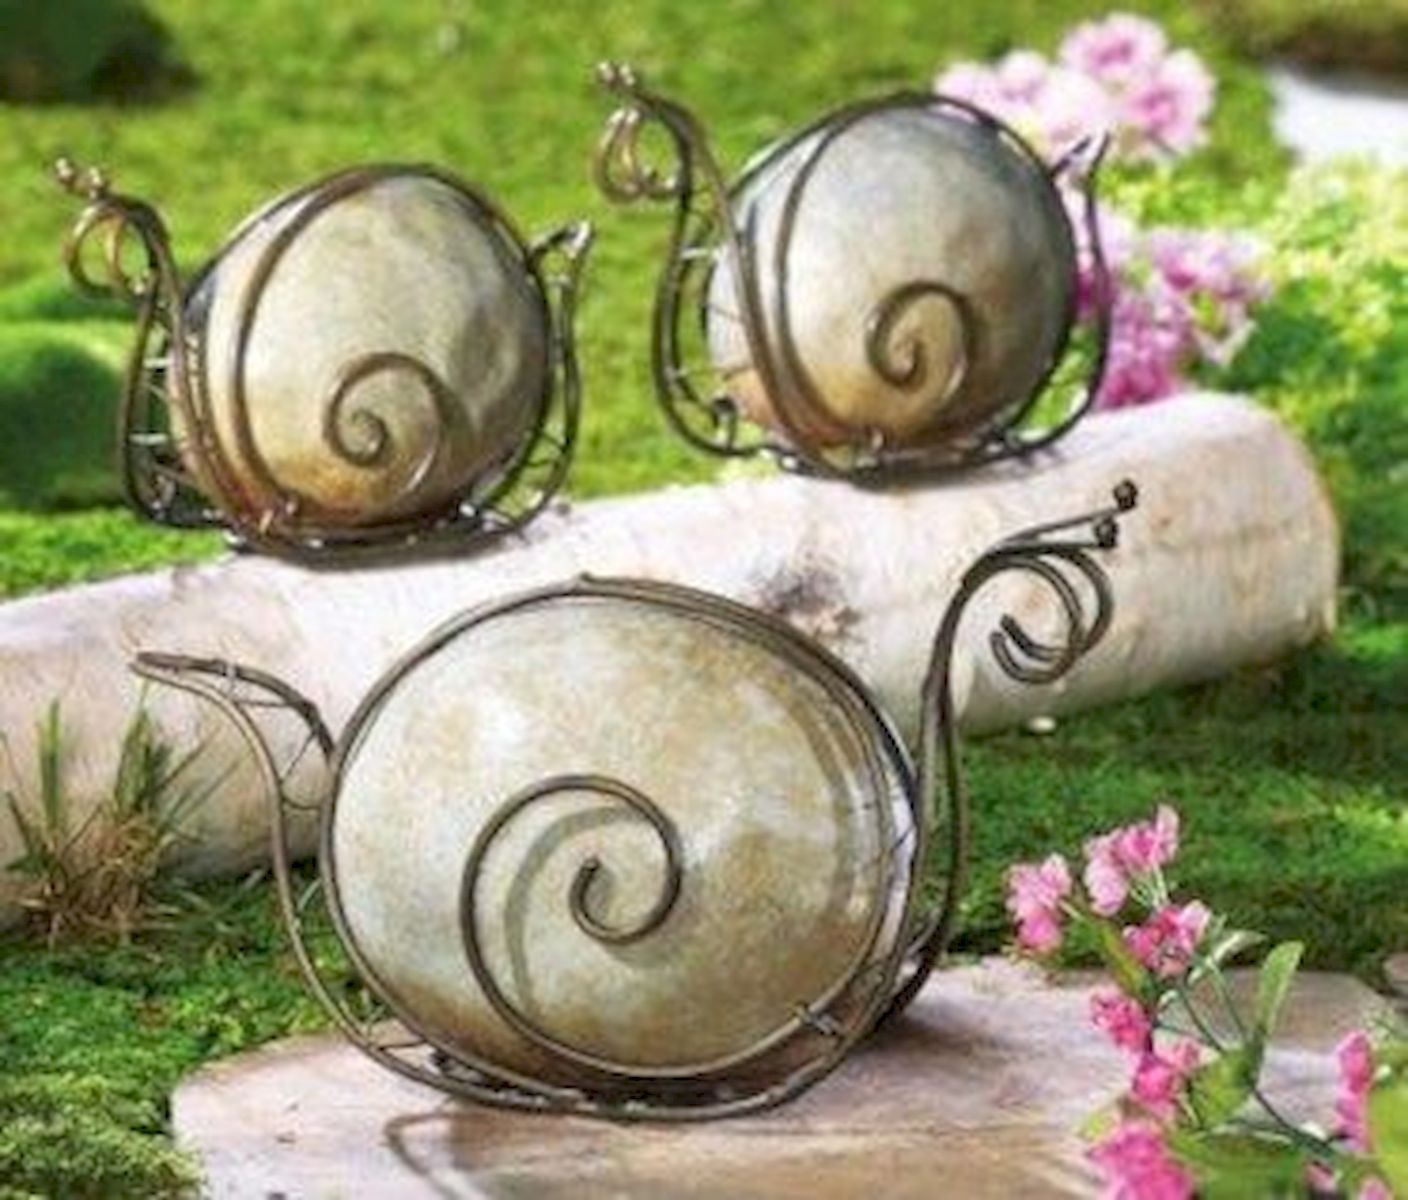 Outdoor lawn ornaments